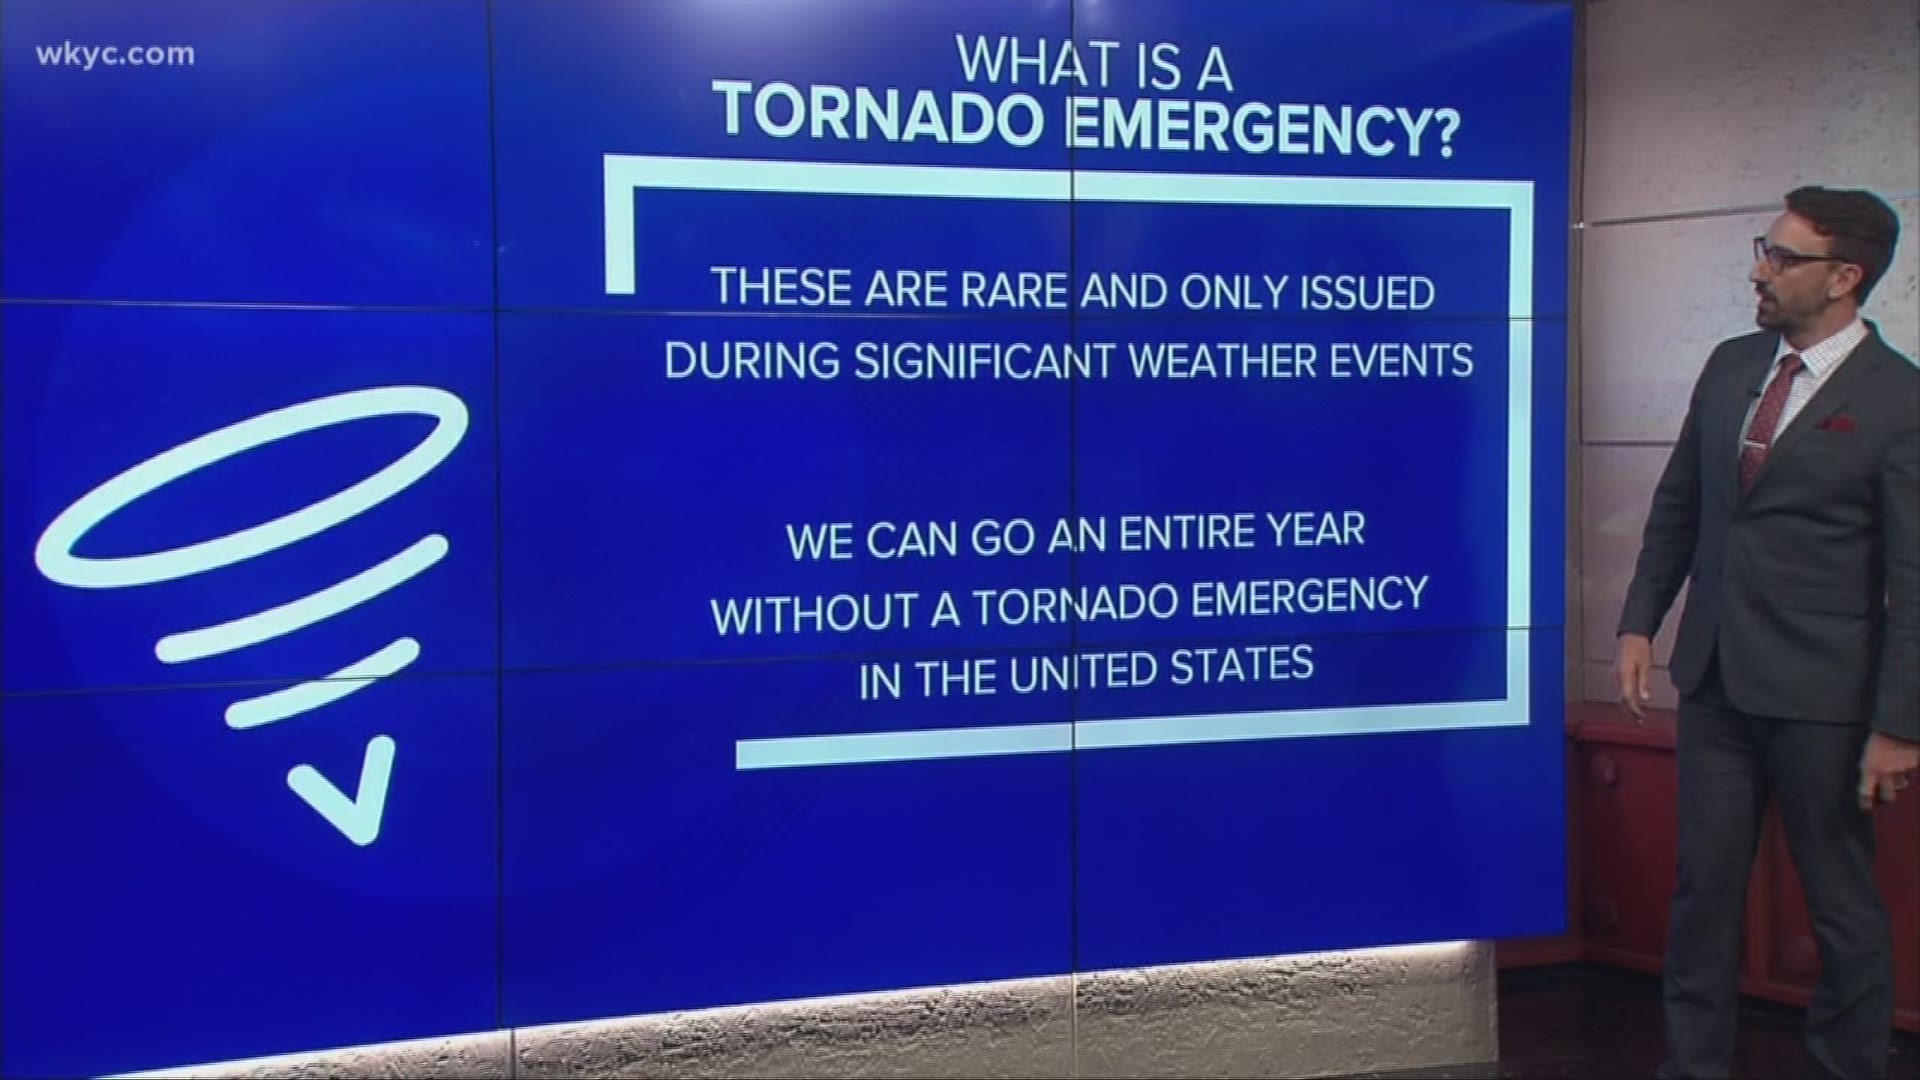 During Monday's severe storms in Southwest Ohio, we heard a term during the tornadoes that we rarely hear: a Tornado Emergency. Matt Wintz explains what this rare status actually means.